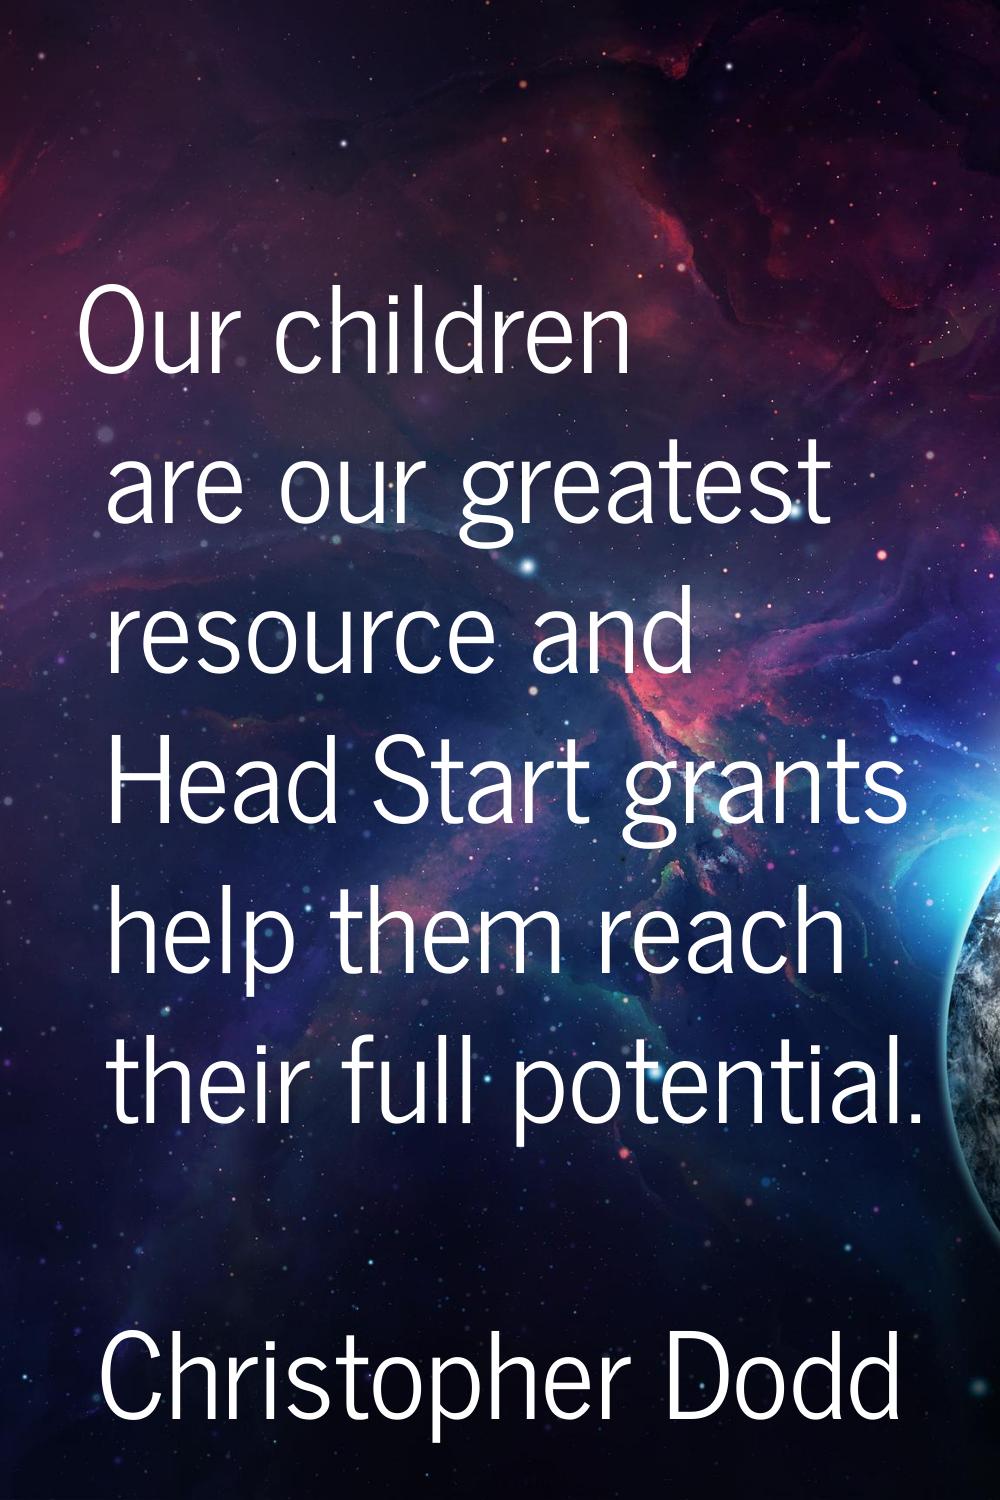 Our children are our greatest resource and Head Start grants help them reach their full potential.